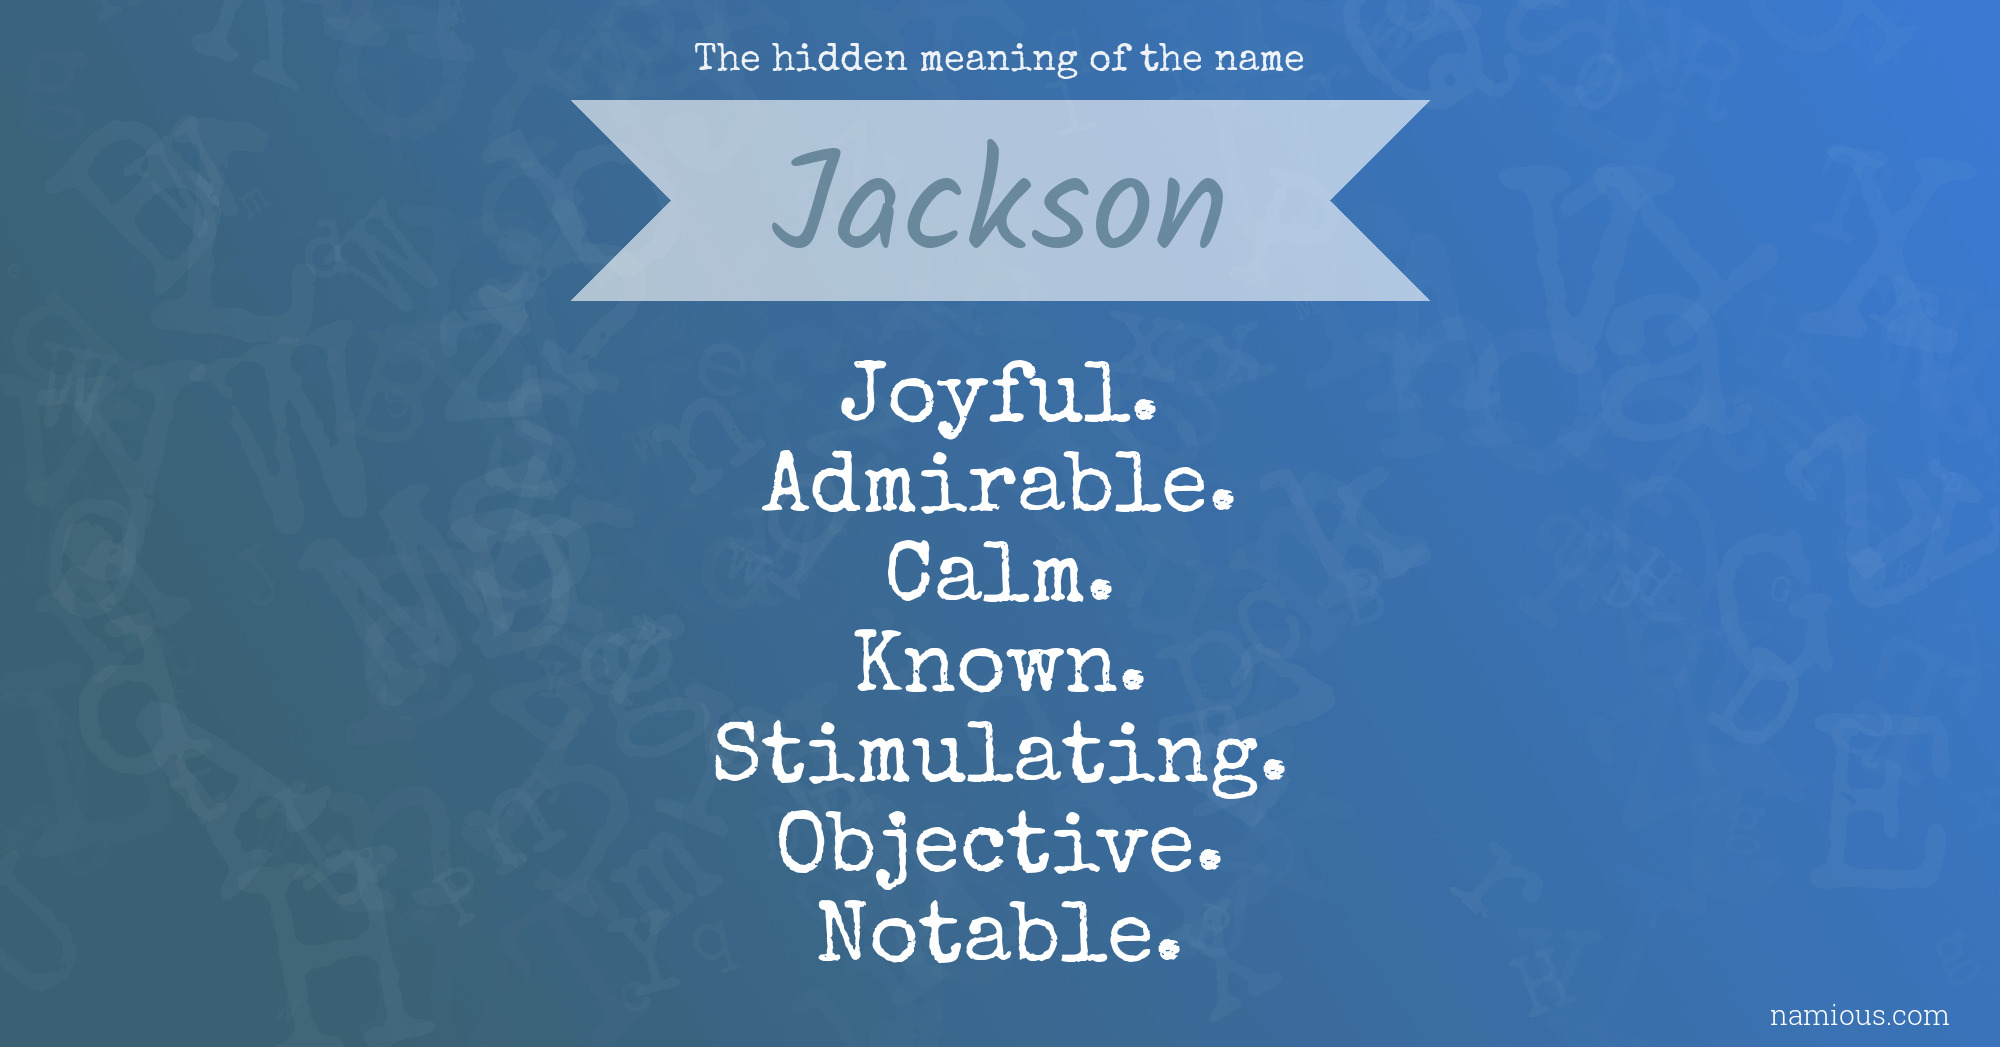 The hidden meaning of the name Jackson